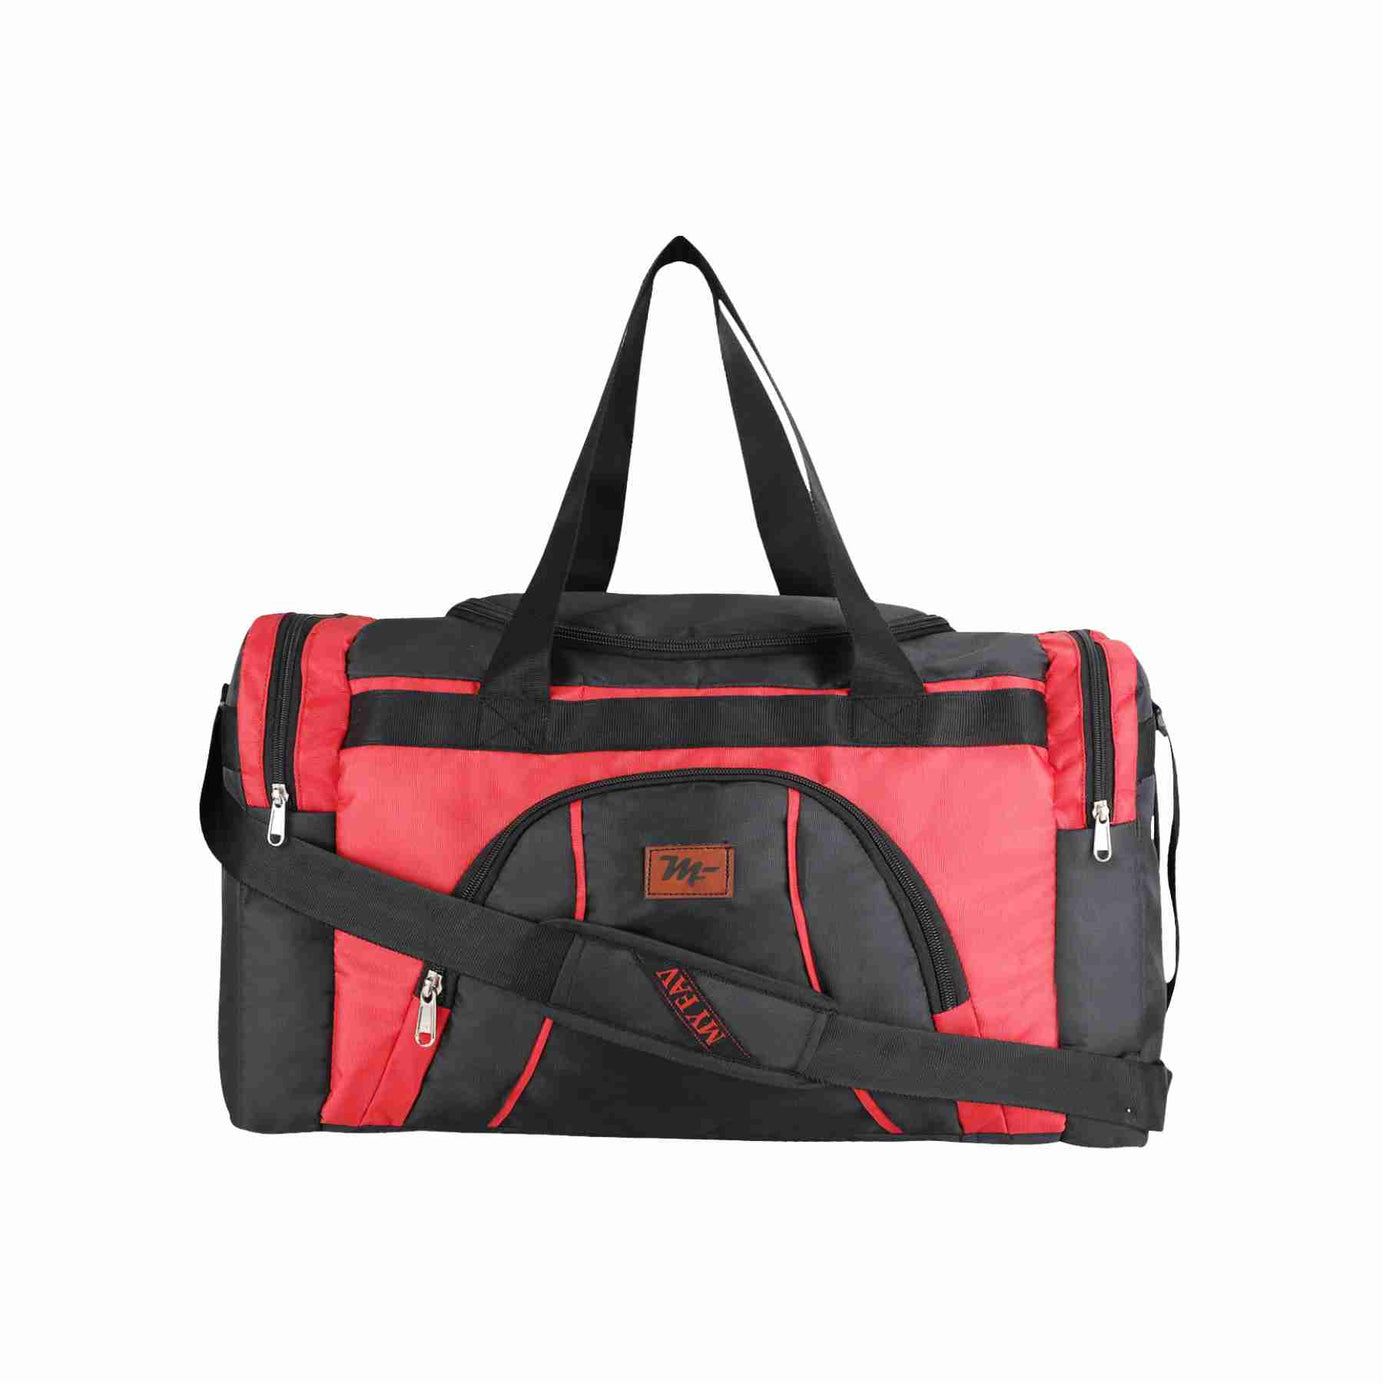 MY FAV Travel Polyester Duffle Bag for Men and Women, Sports, Gym, Outdoor Weekend Bag with Accessories Compartments Waterproof Duffle Bag - 44 litres Capacity